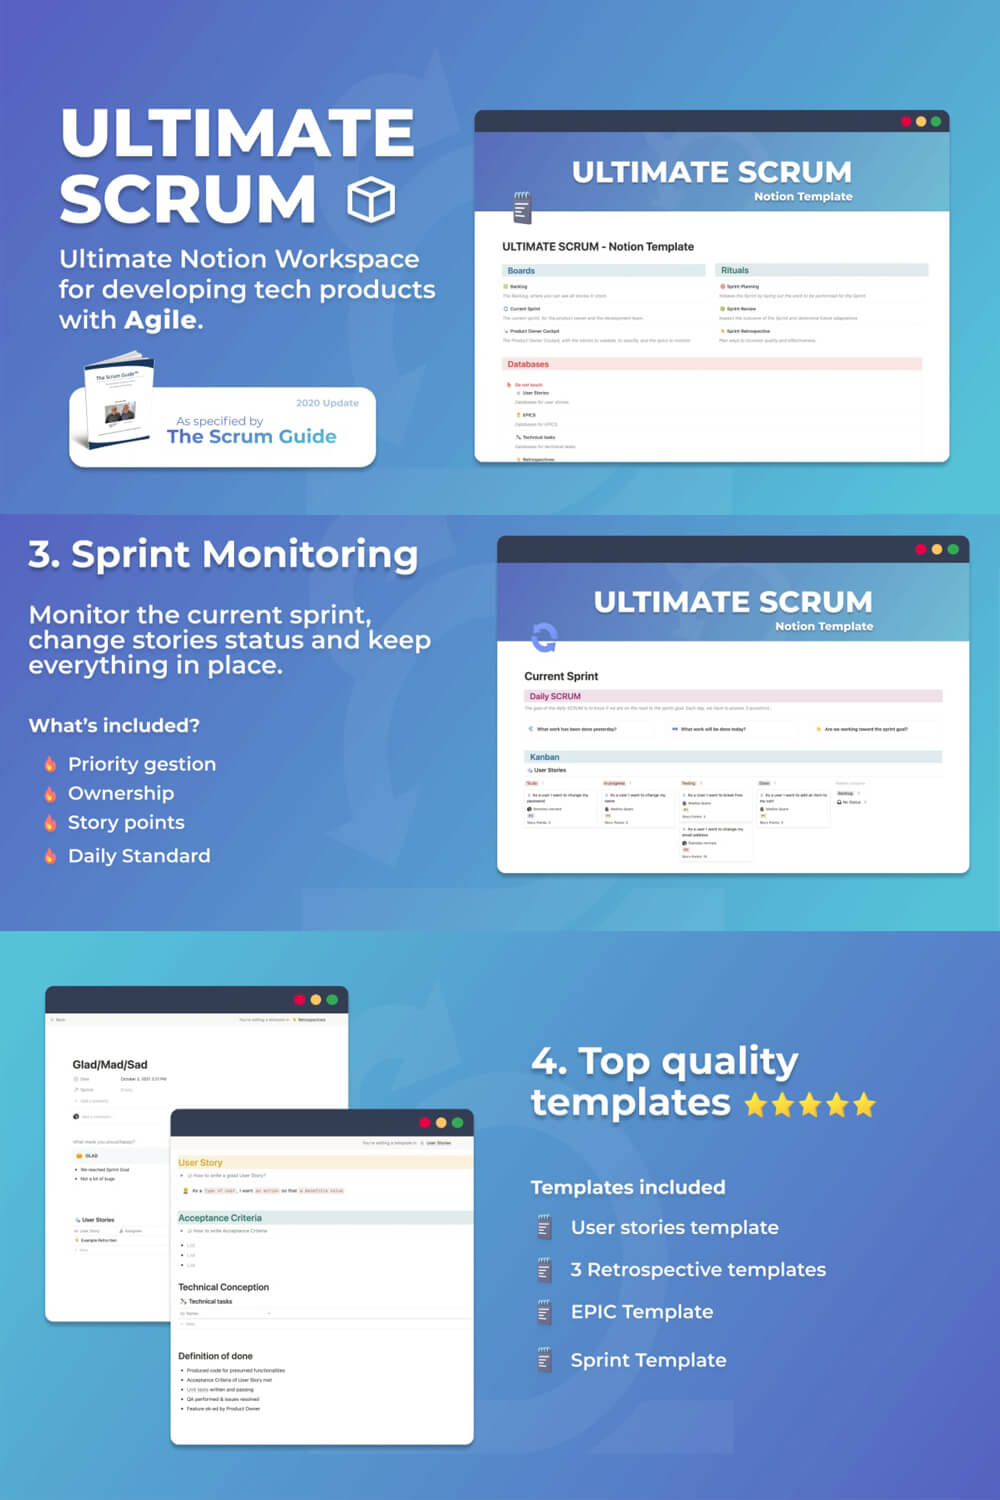 The Ultimate Scrum - top quality templates.